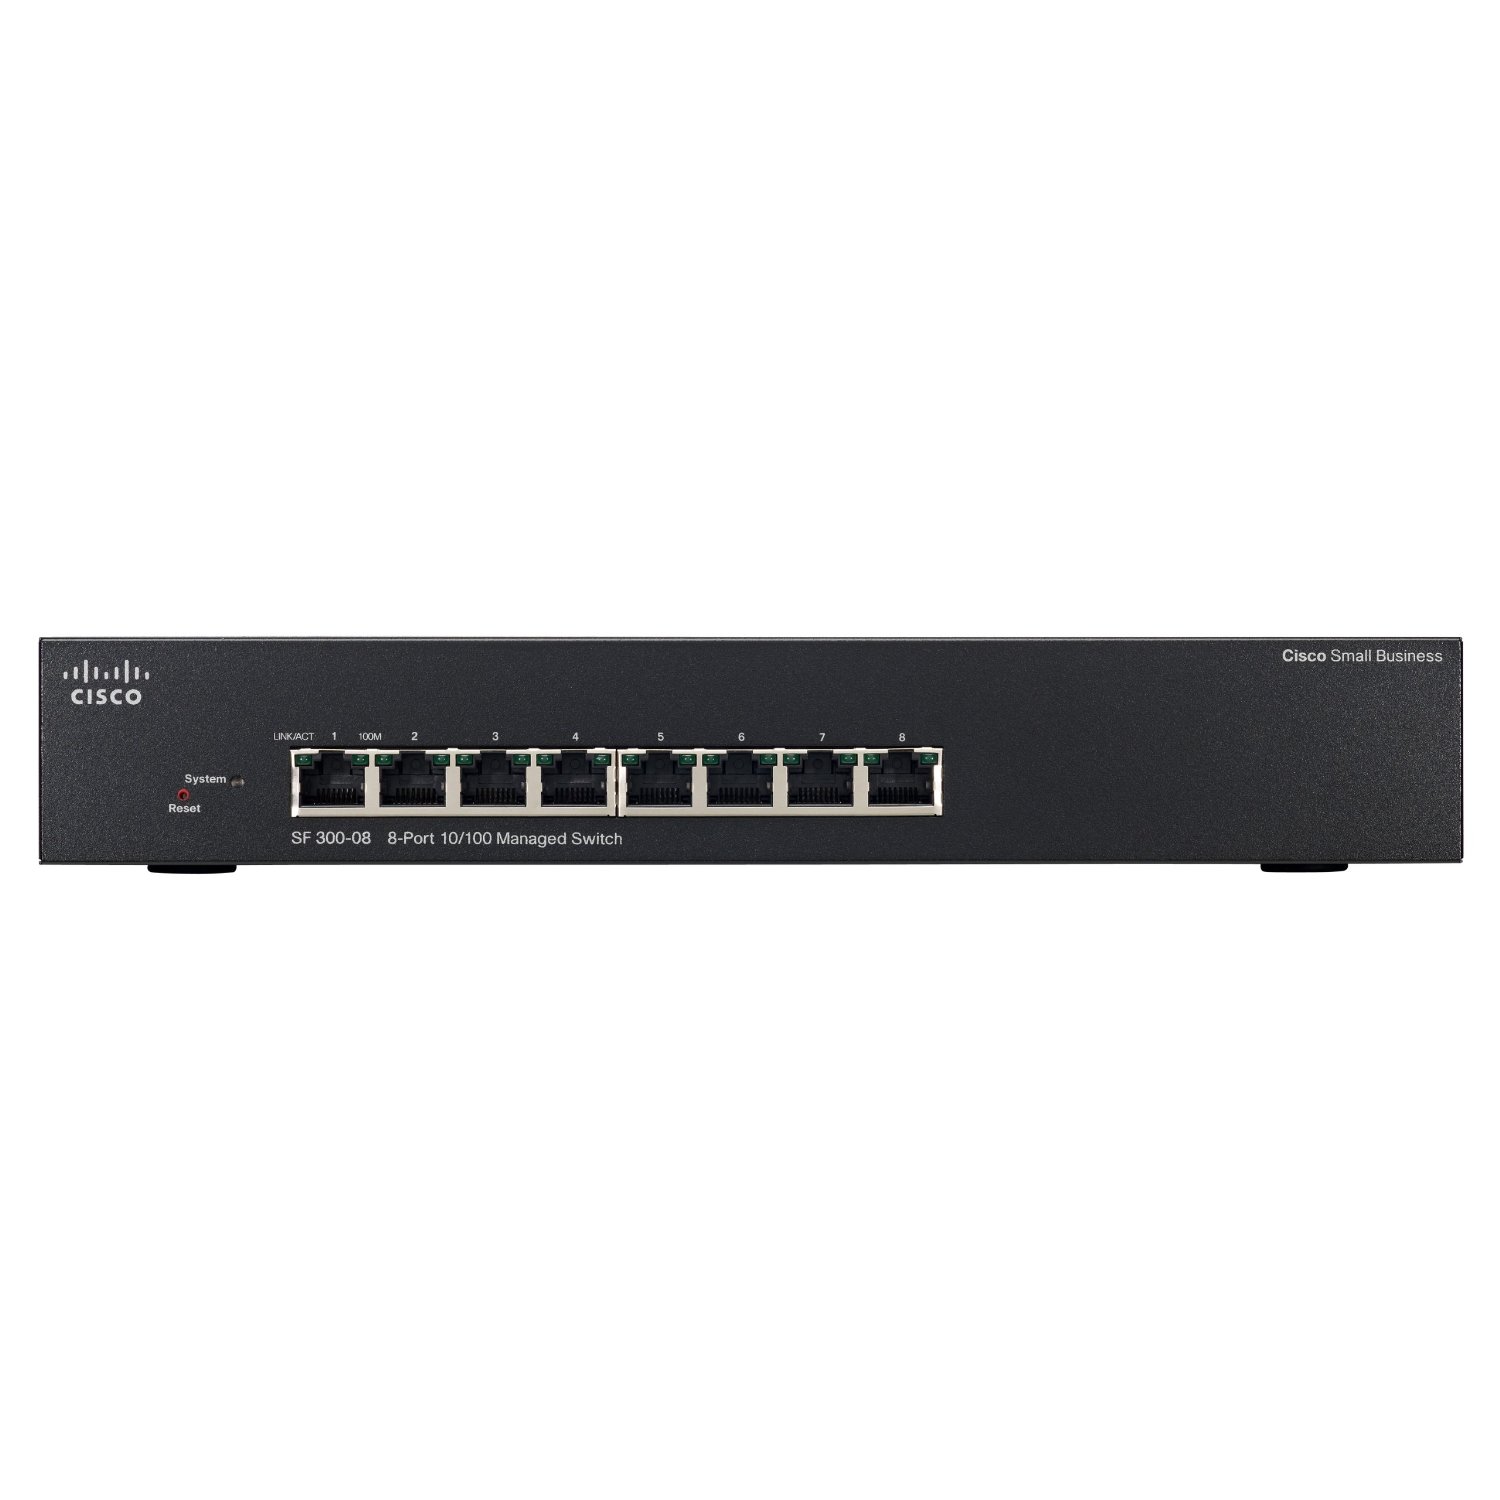 http://thetechjournal.com/wp-content/uploads/images/1110/1319999239-cisco-sf-30008-8port-10100-managed-switch-1.jpg